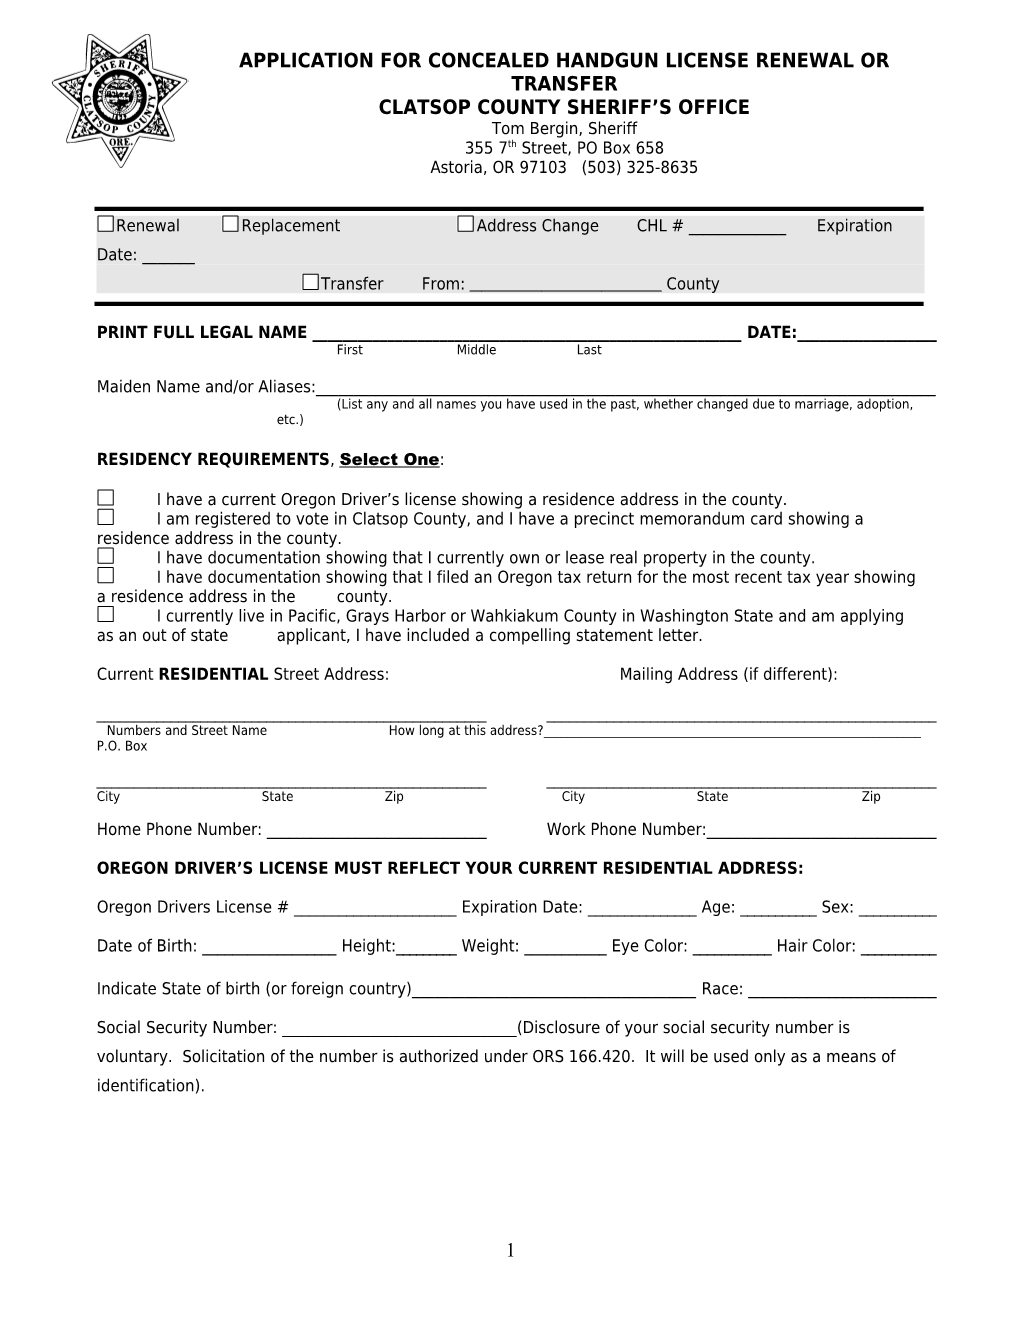 Application for License to Carry a Concealed Handgun